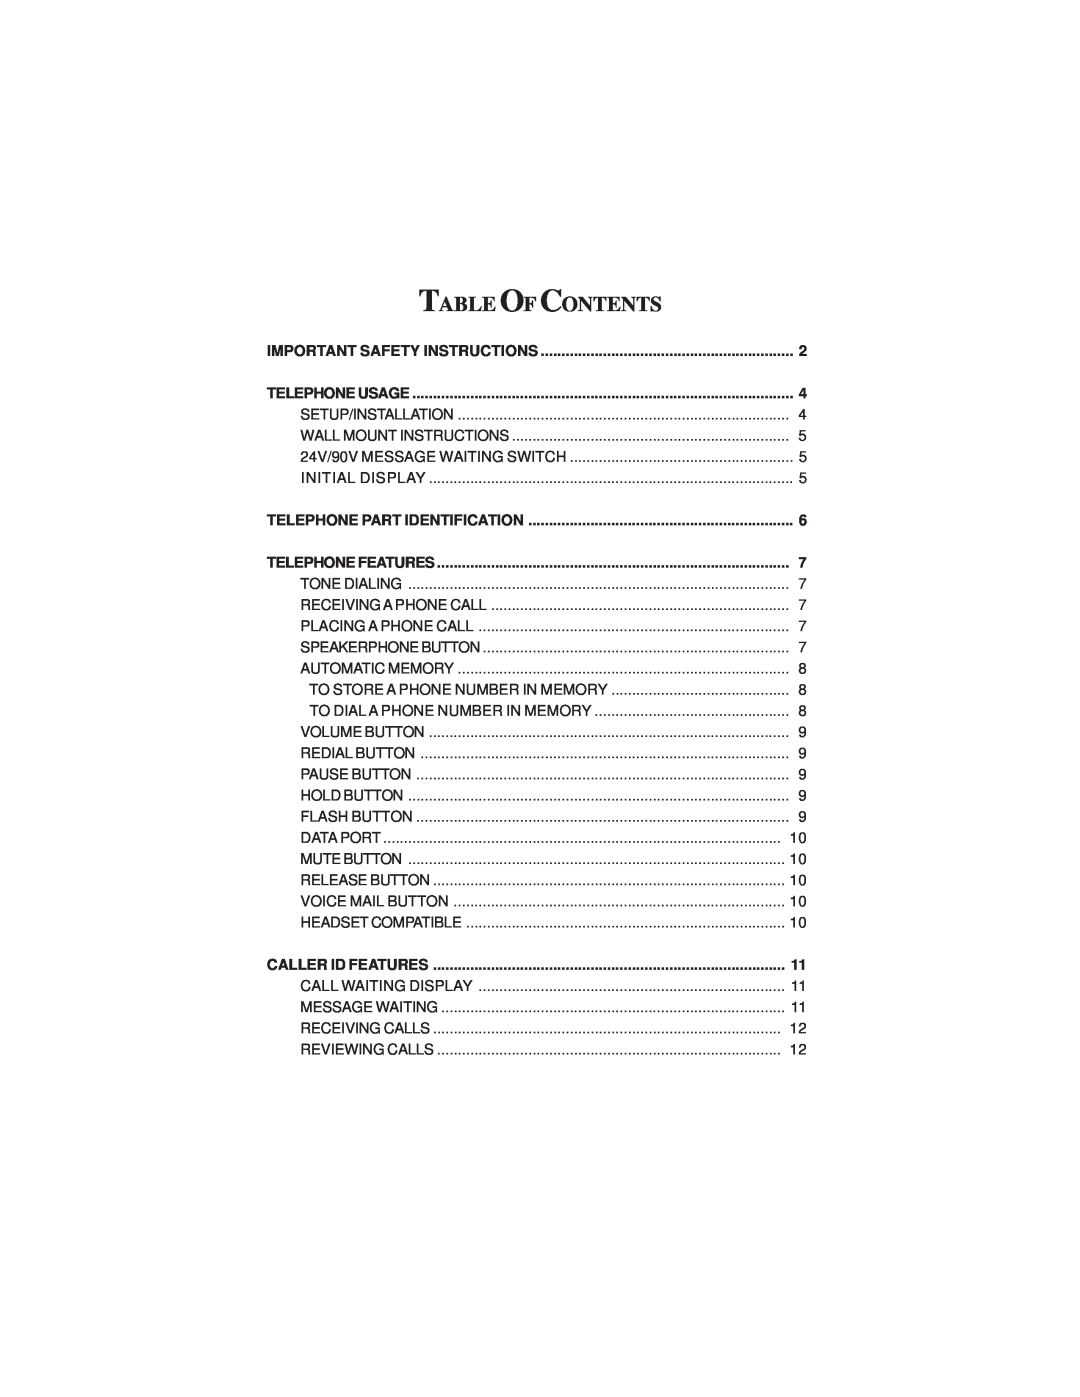 Cortelco 2211 Table Of Contents, Important Safety Instructions, Telephone Usage, Telephone Part Identification 